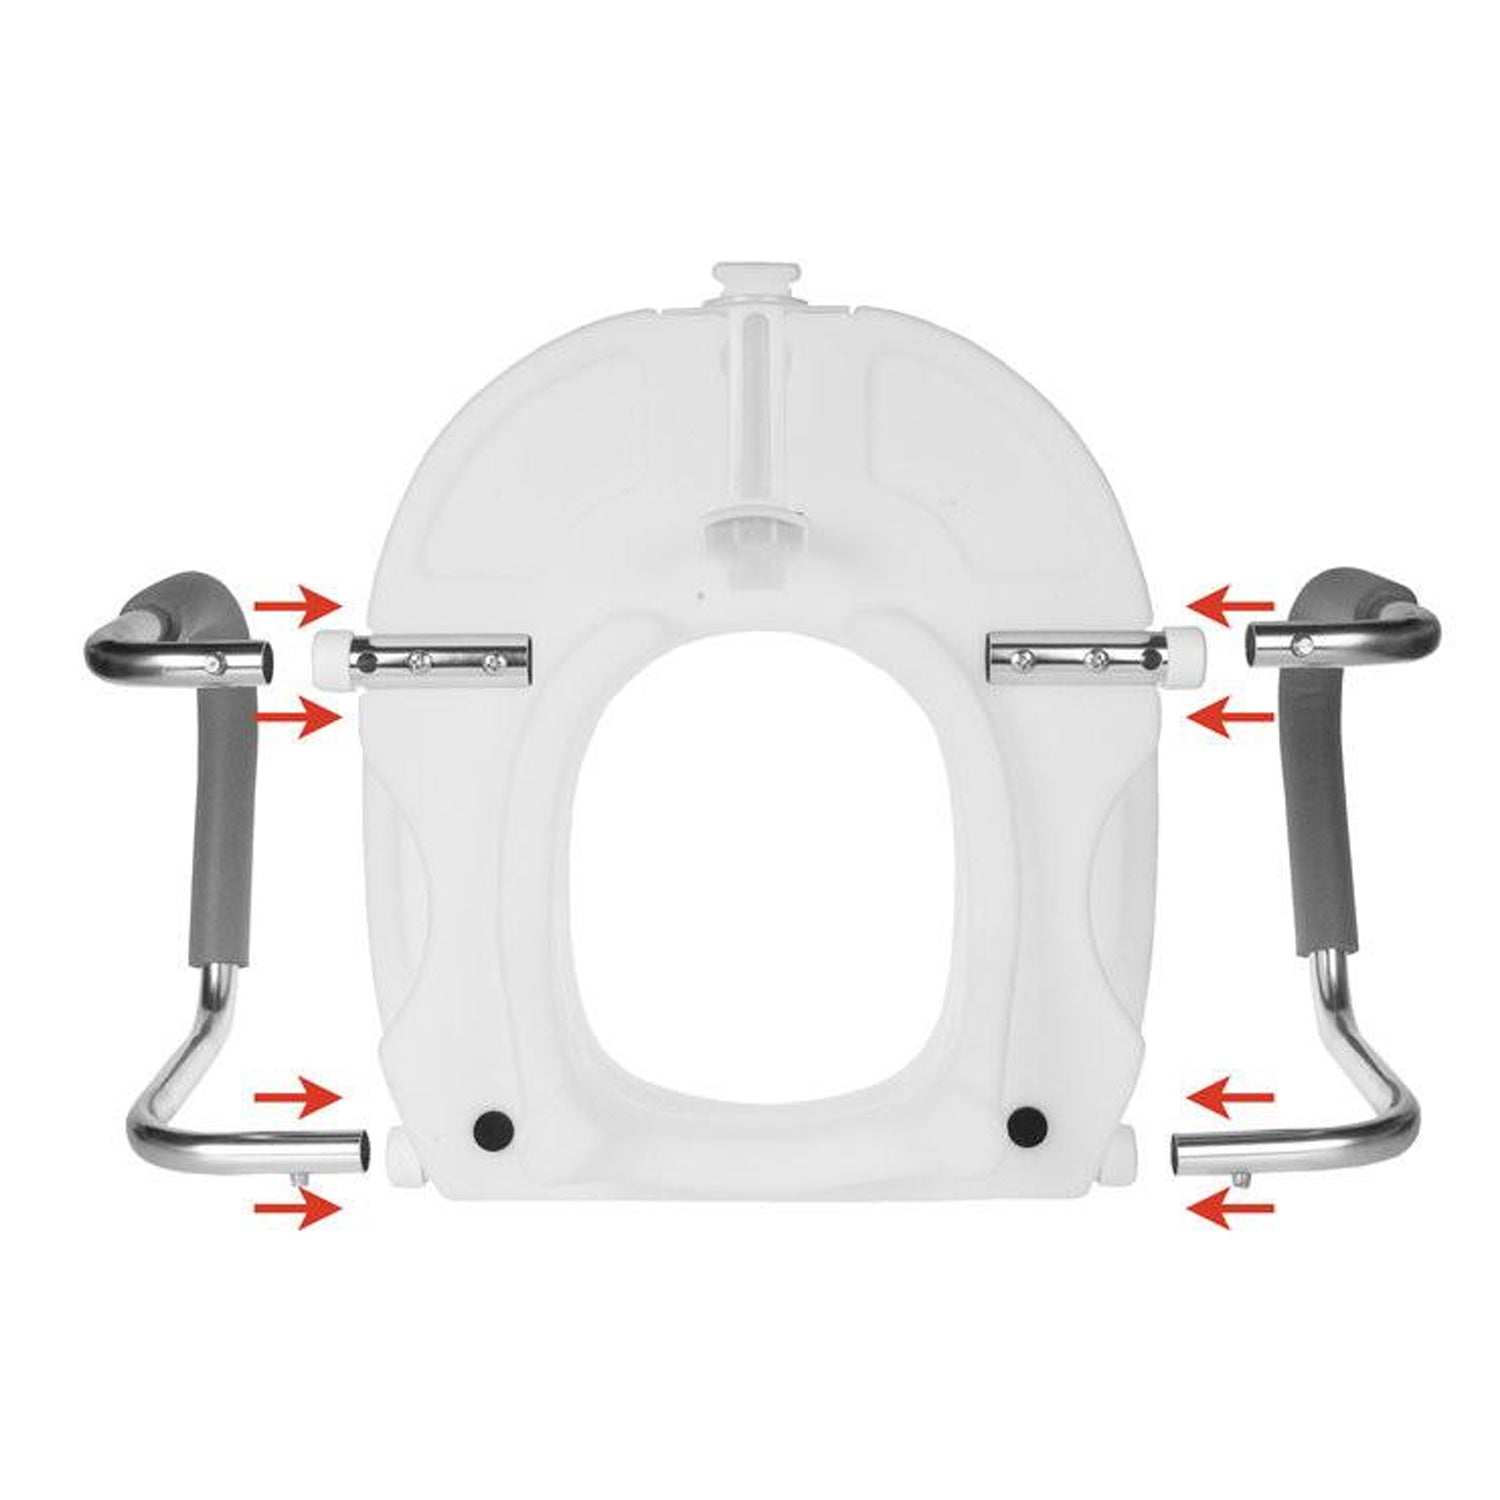 Arms For Raised Toilet Seat, 7015, 7019, 7020 - PR/1 - Home Health Store Inc